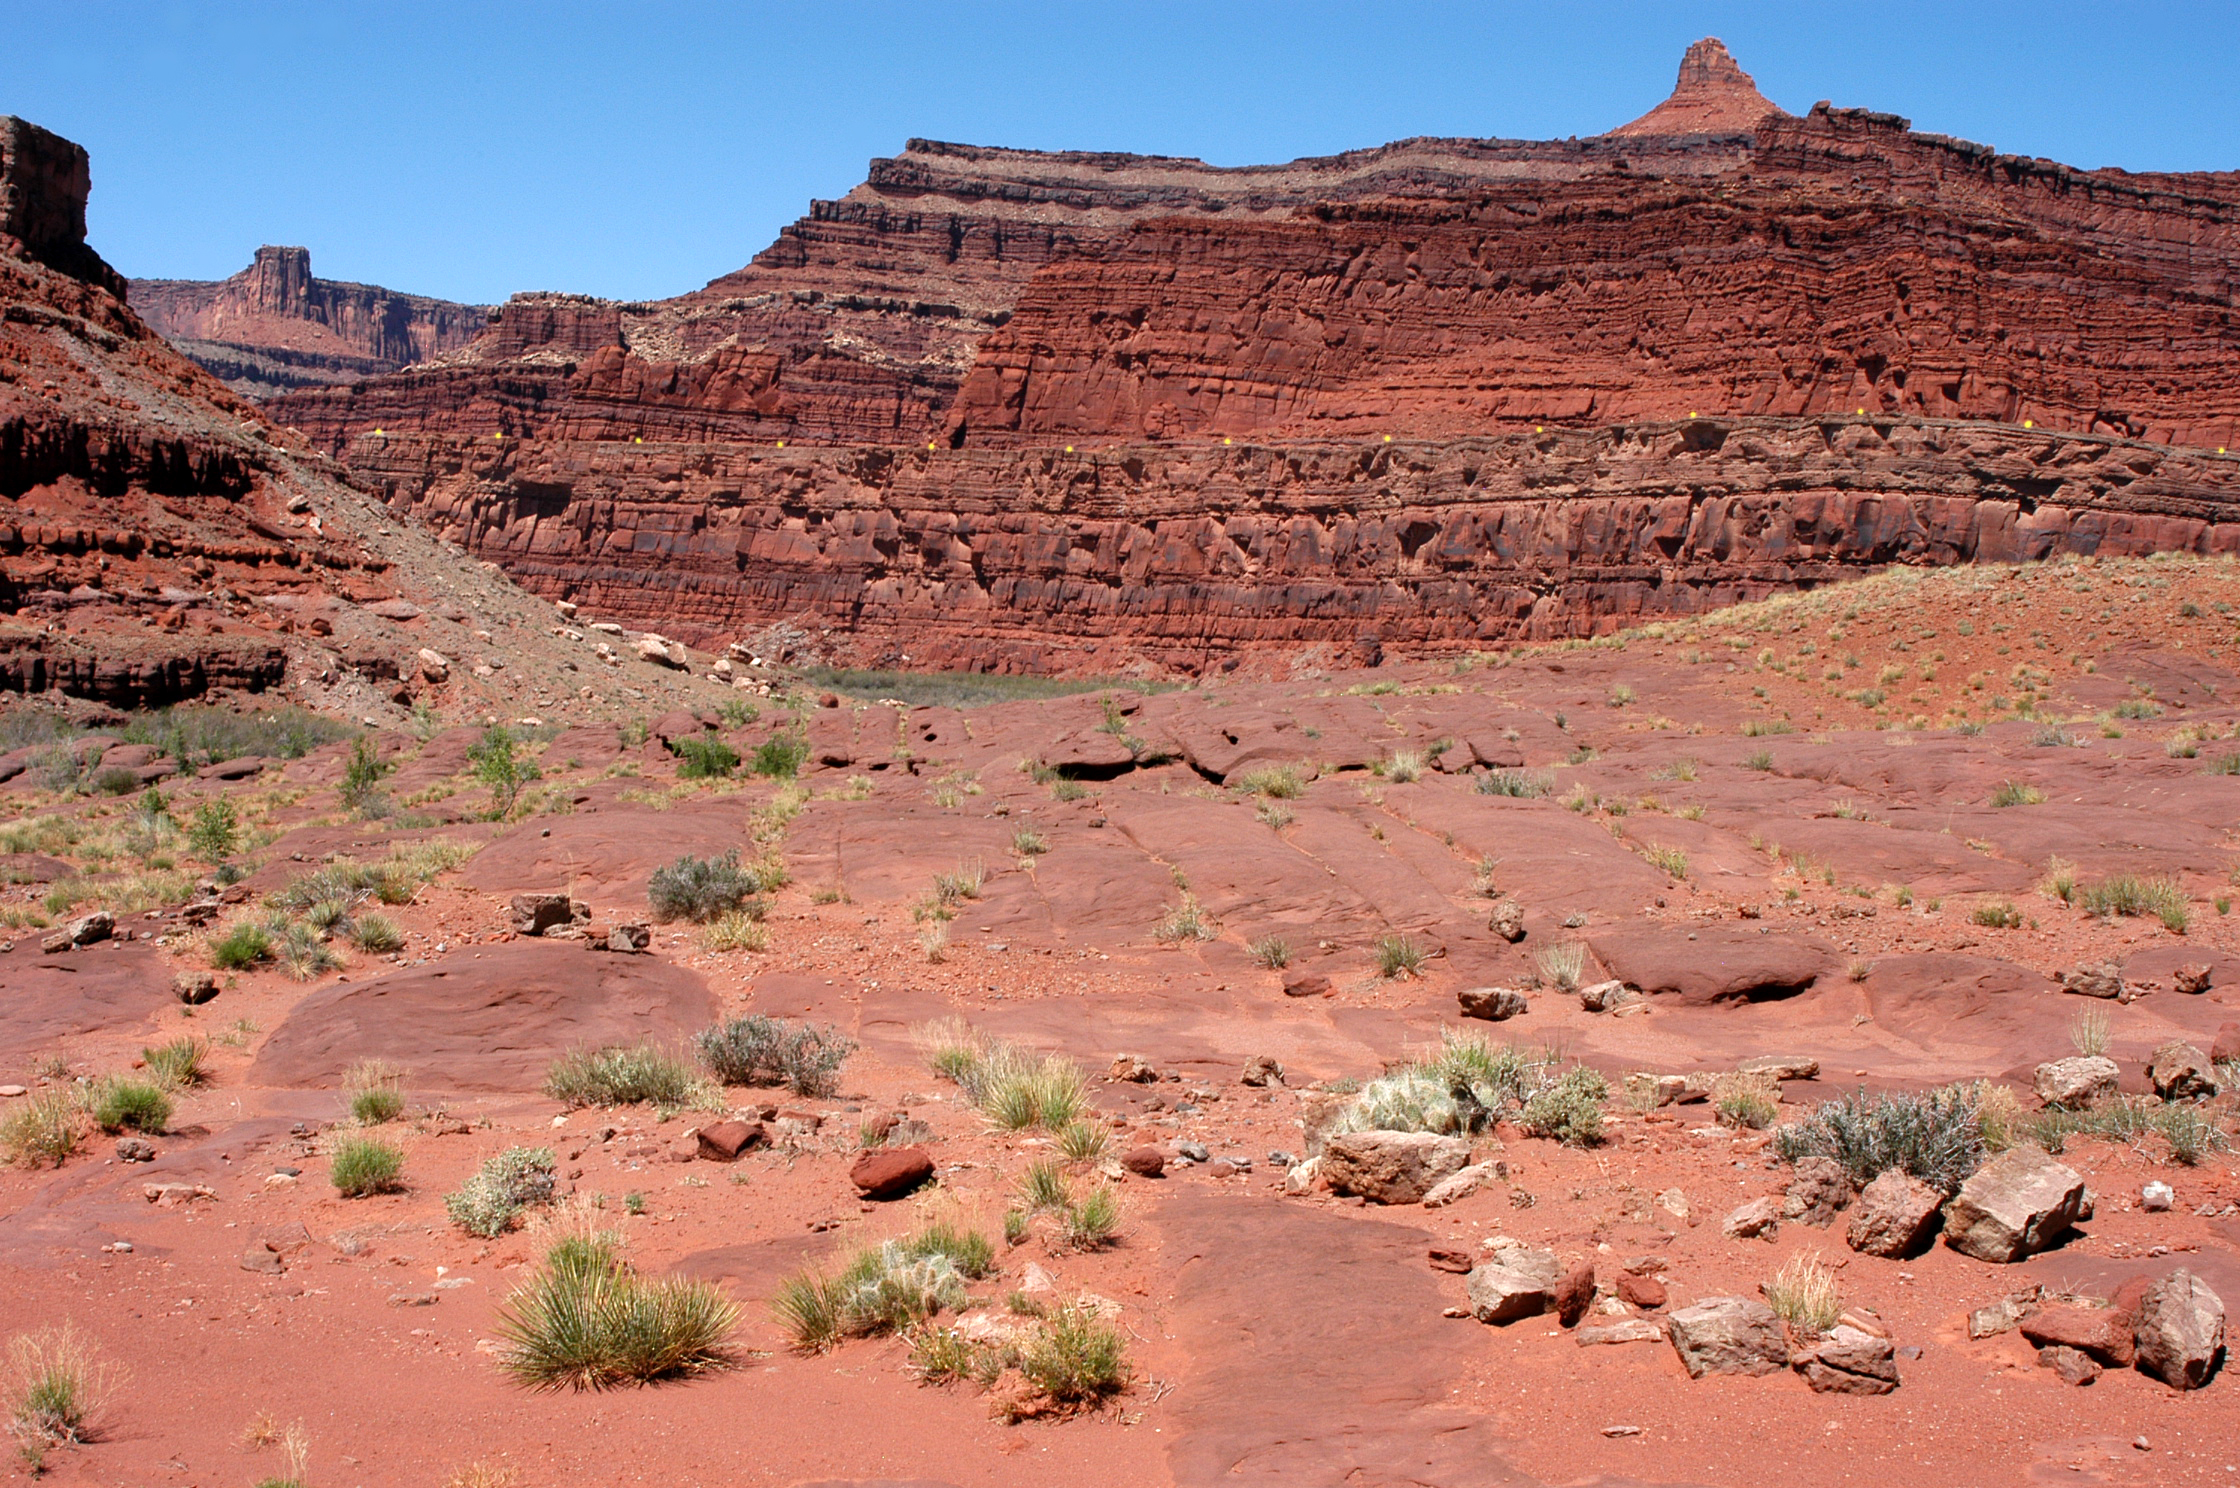 Looking northwest at Shafer Trail